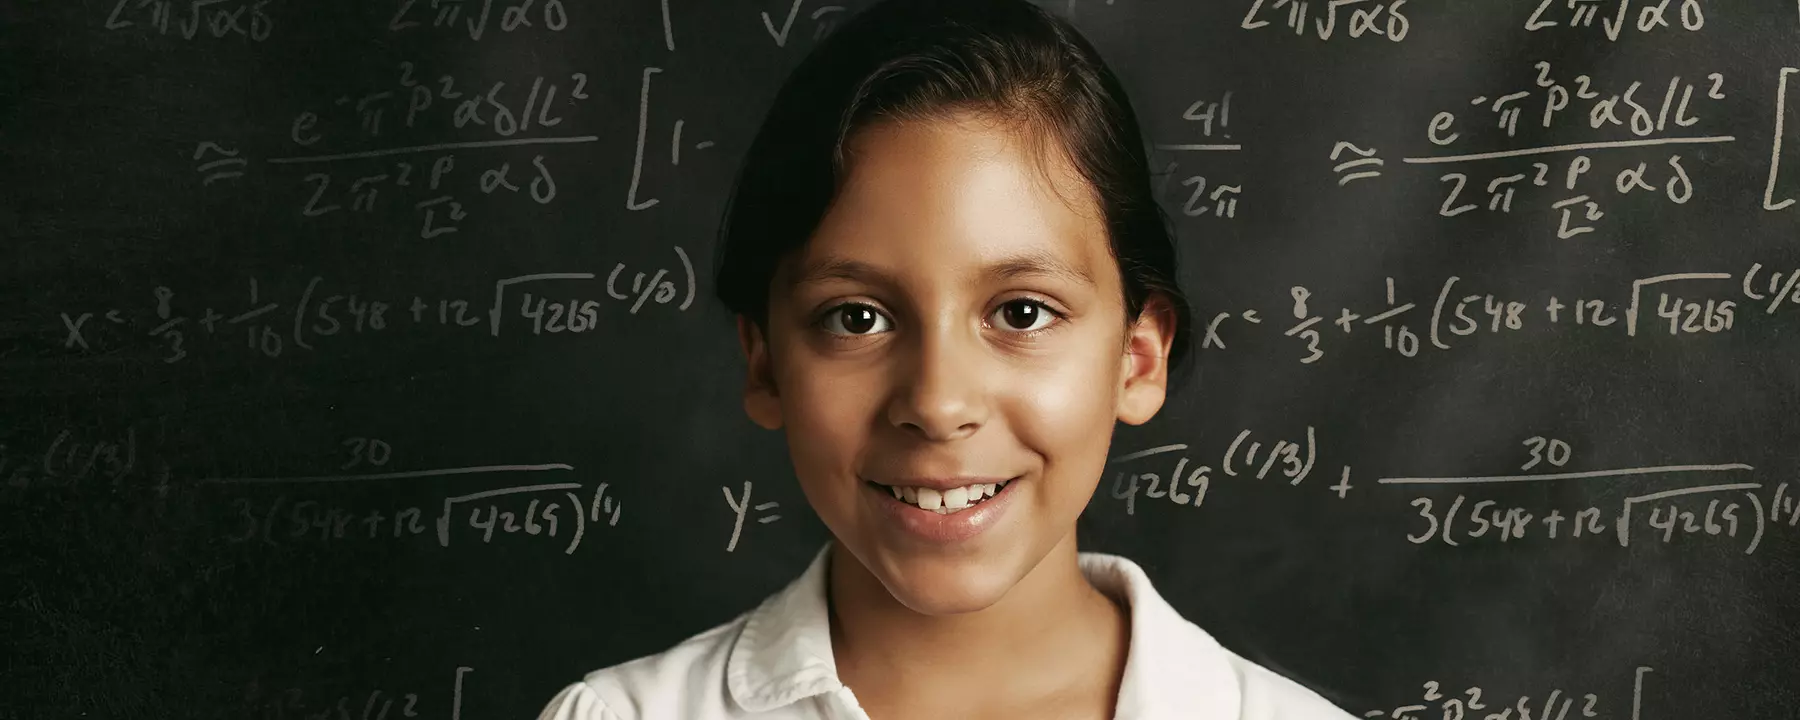 A young student in front of a chalkboard with equations written on it